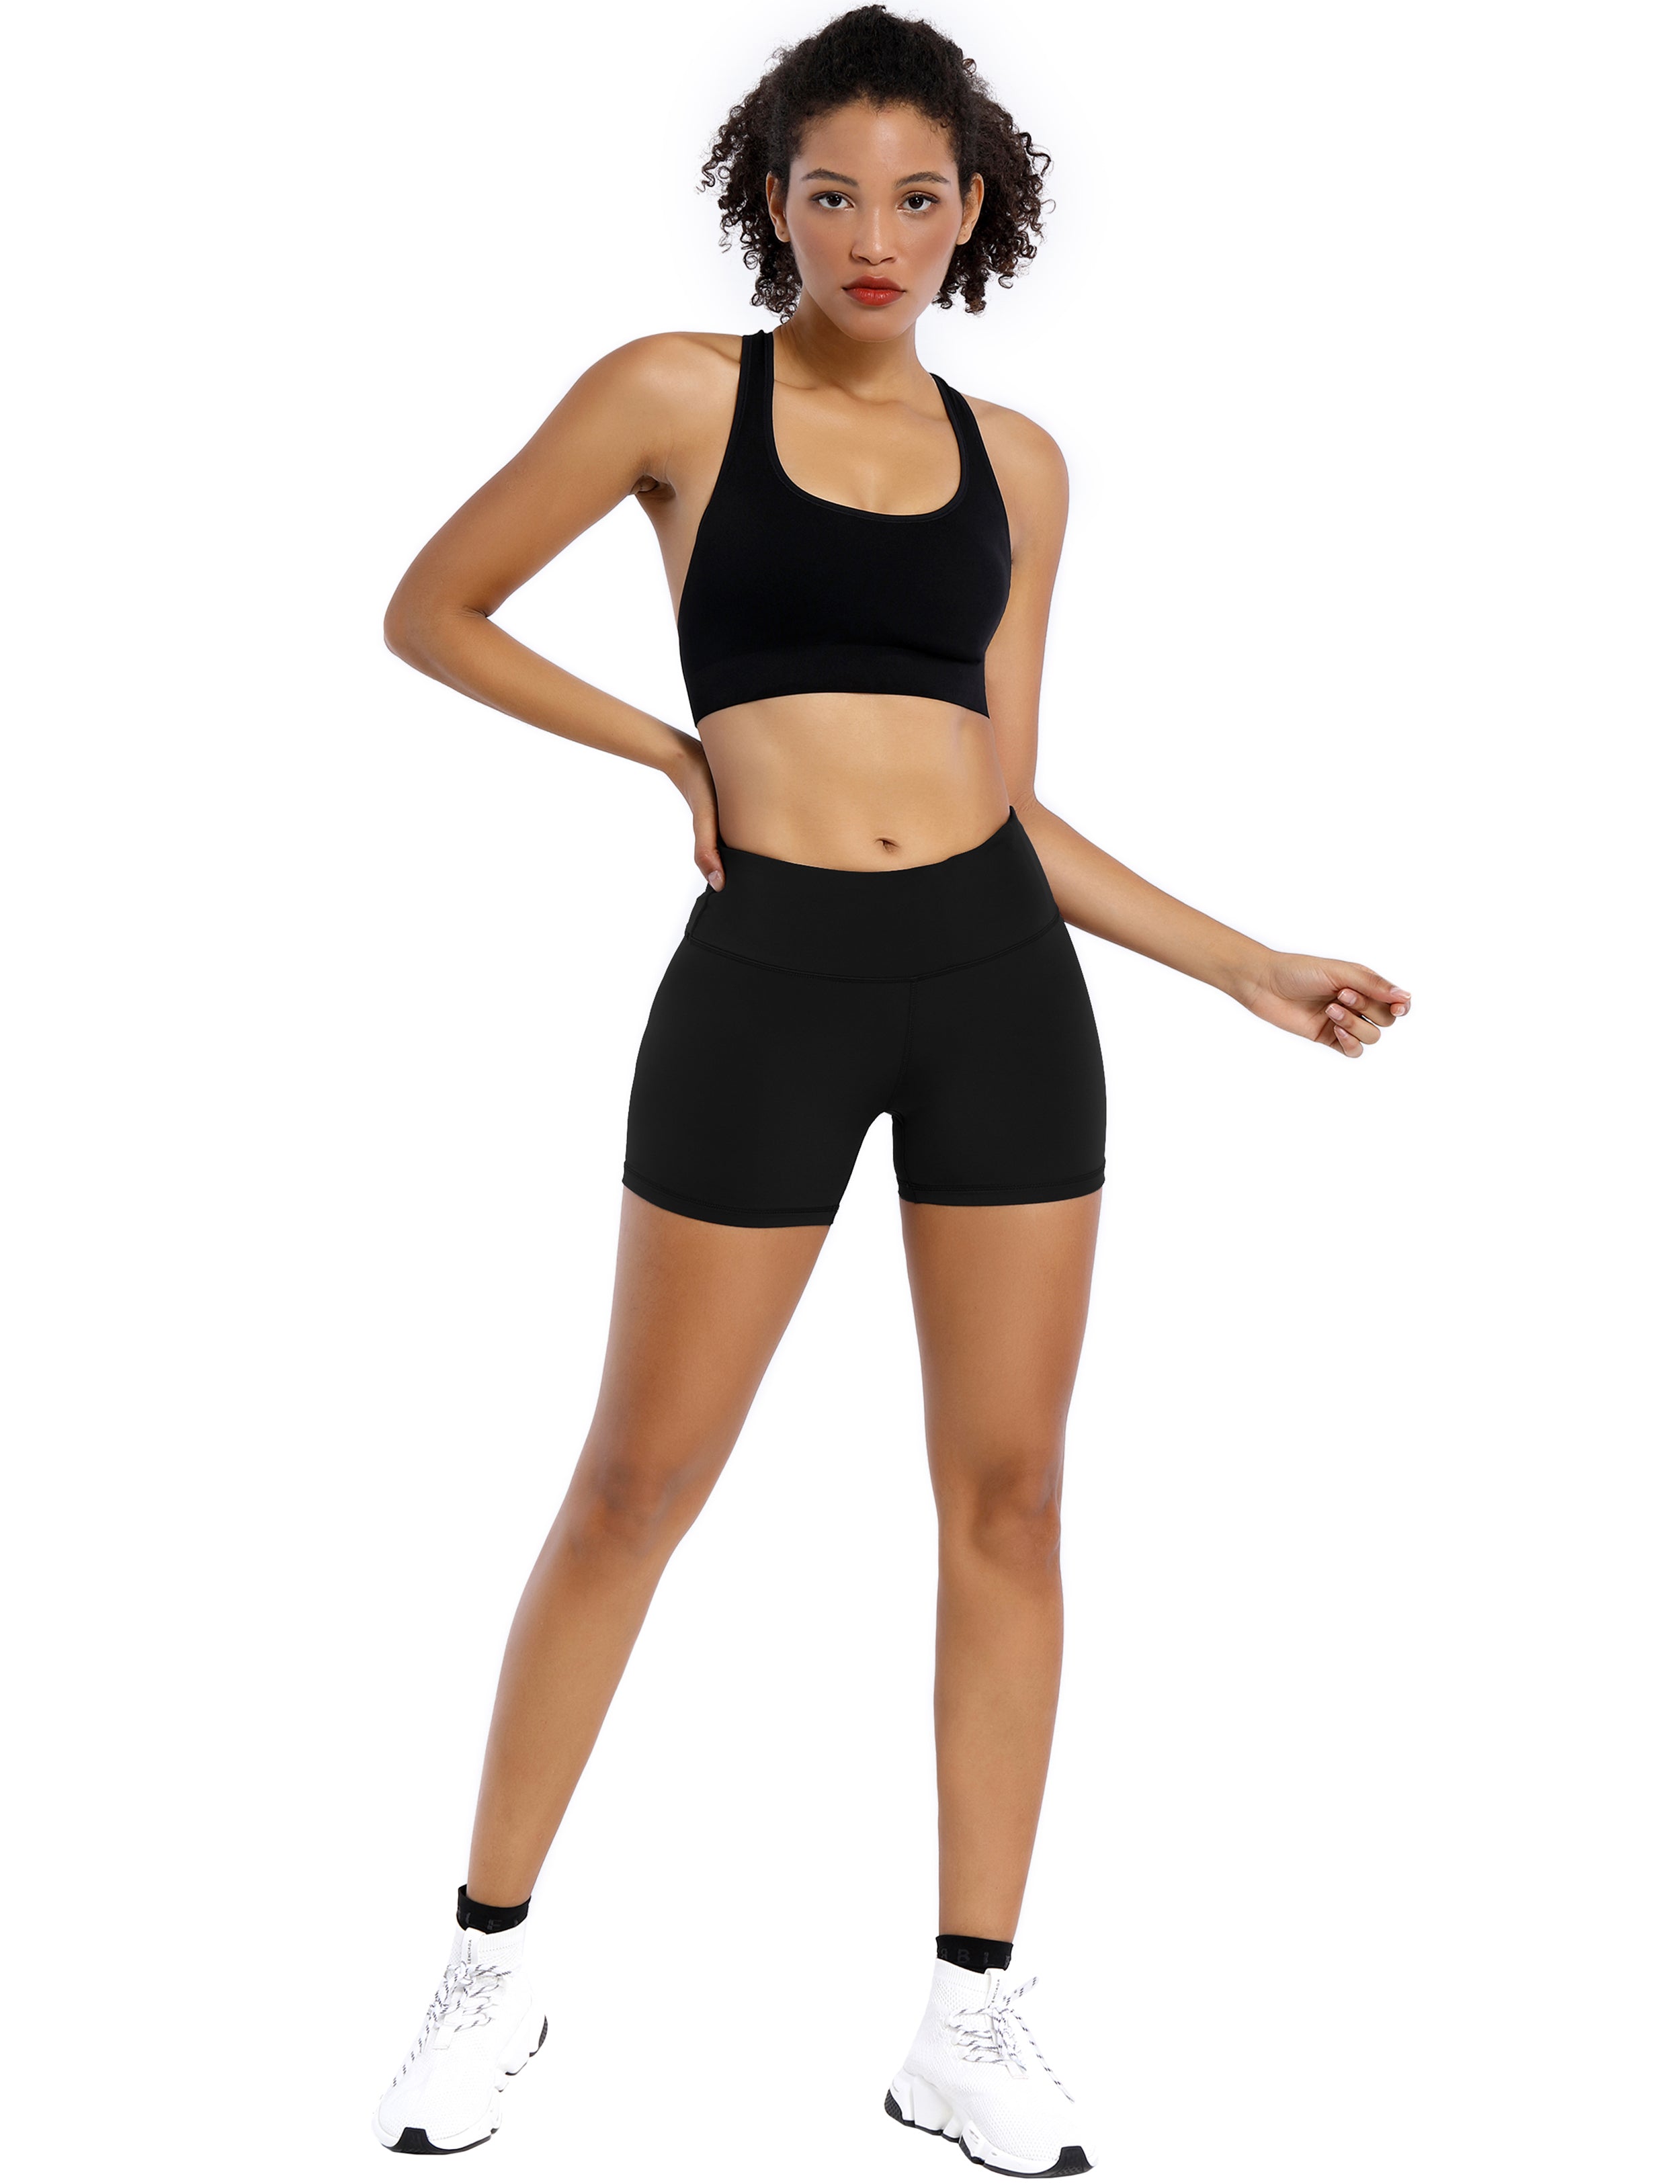 4" Biking Shorts black Sleek, soft, smooth and totally comfortable: our newest style is here. Softest-ever fabric High elasticity High density 4-way stretch Fabric doesn't attract lint easily No see-through Moisture-wicking Machine wash 75% Nylon, 25% Spandex